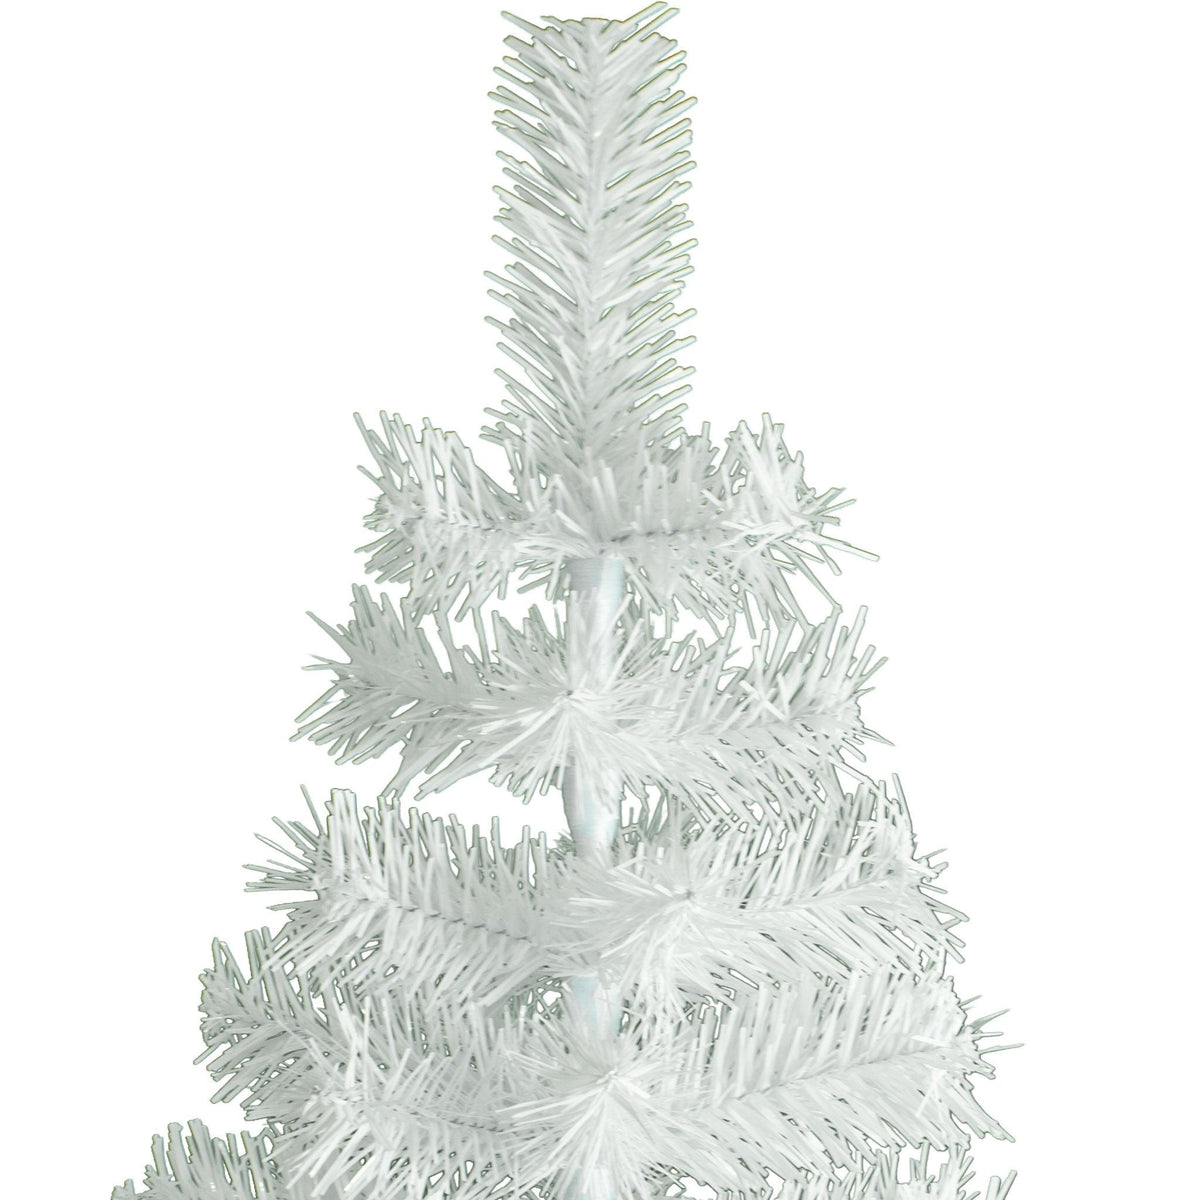 Top of the 24in Classic White Tinsel Christmas Tree from Lee Display